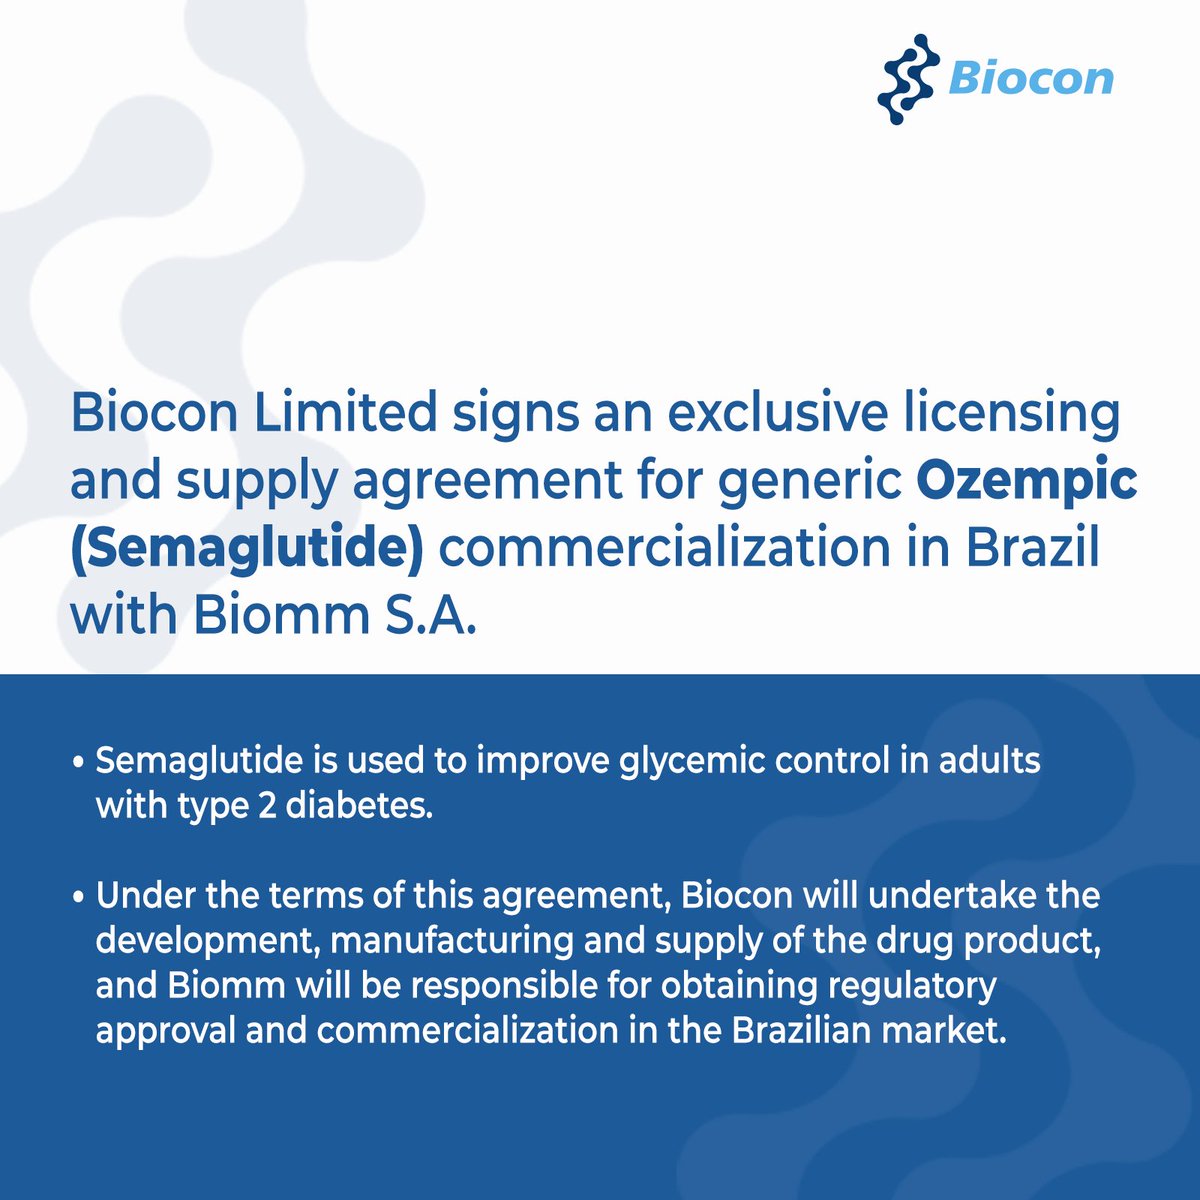 #Press: Biocon Limited signs an exclusive licensing & supply agreement for generic Ozempic (Semaglutide) commercialization in Brazil with Biomm S.A., a specialty pharmaceutical company in Brazil.

@sidmittal, CEO & MD, Biocon Ltd, said, “Our partnership with Biomm marks another…